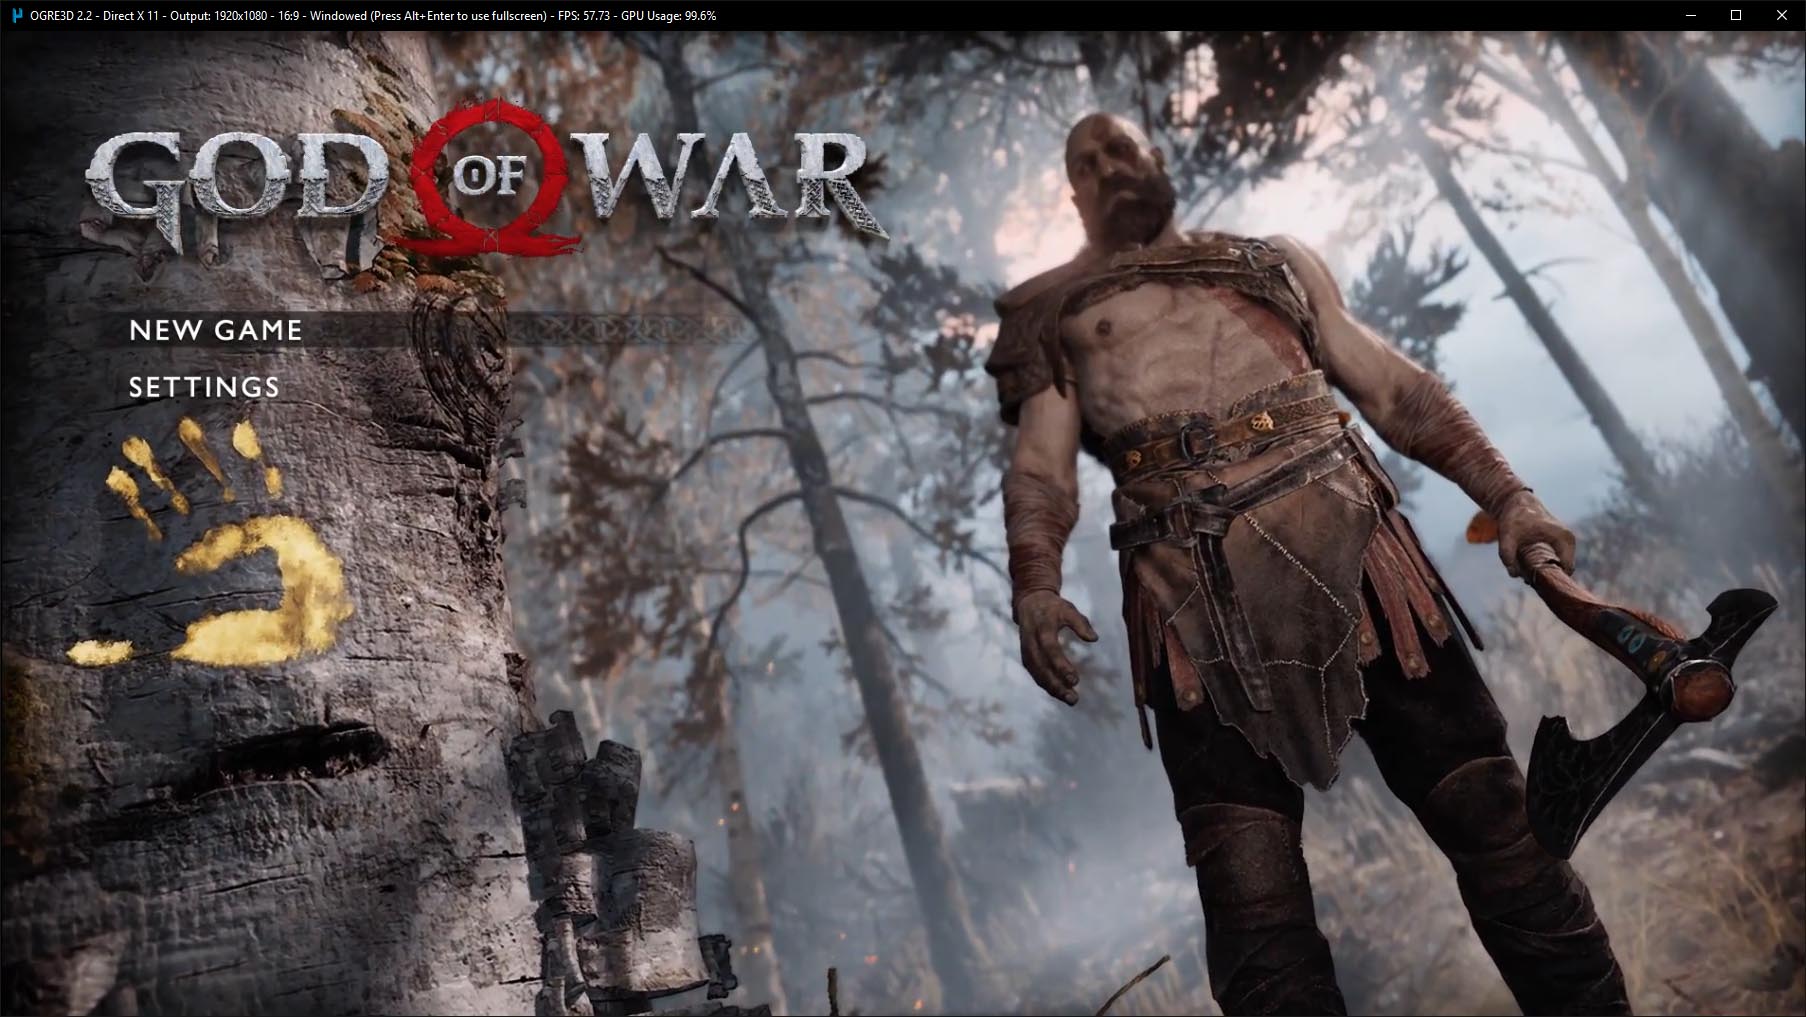 god of war iso file download for ppsspp